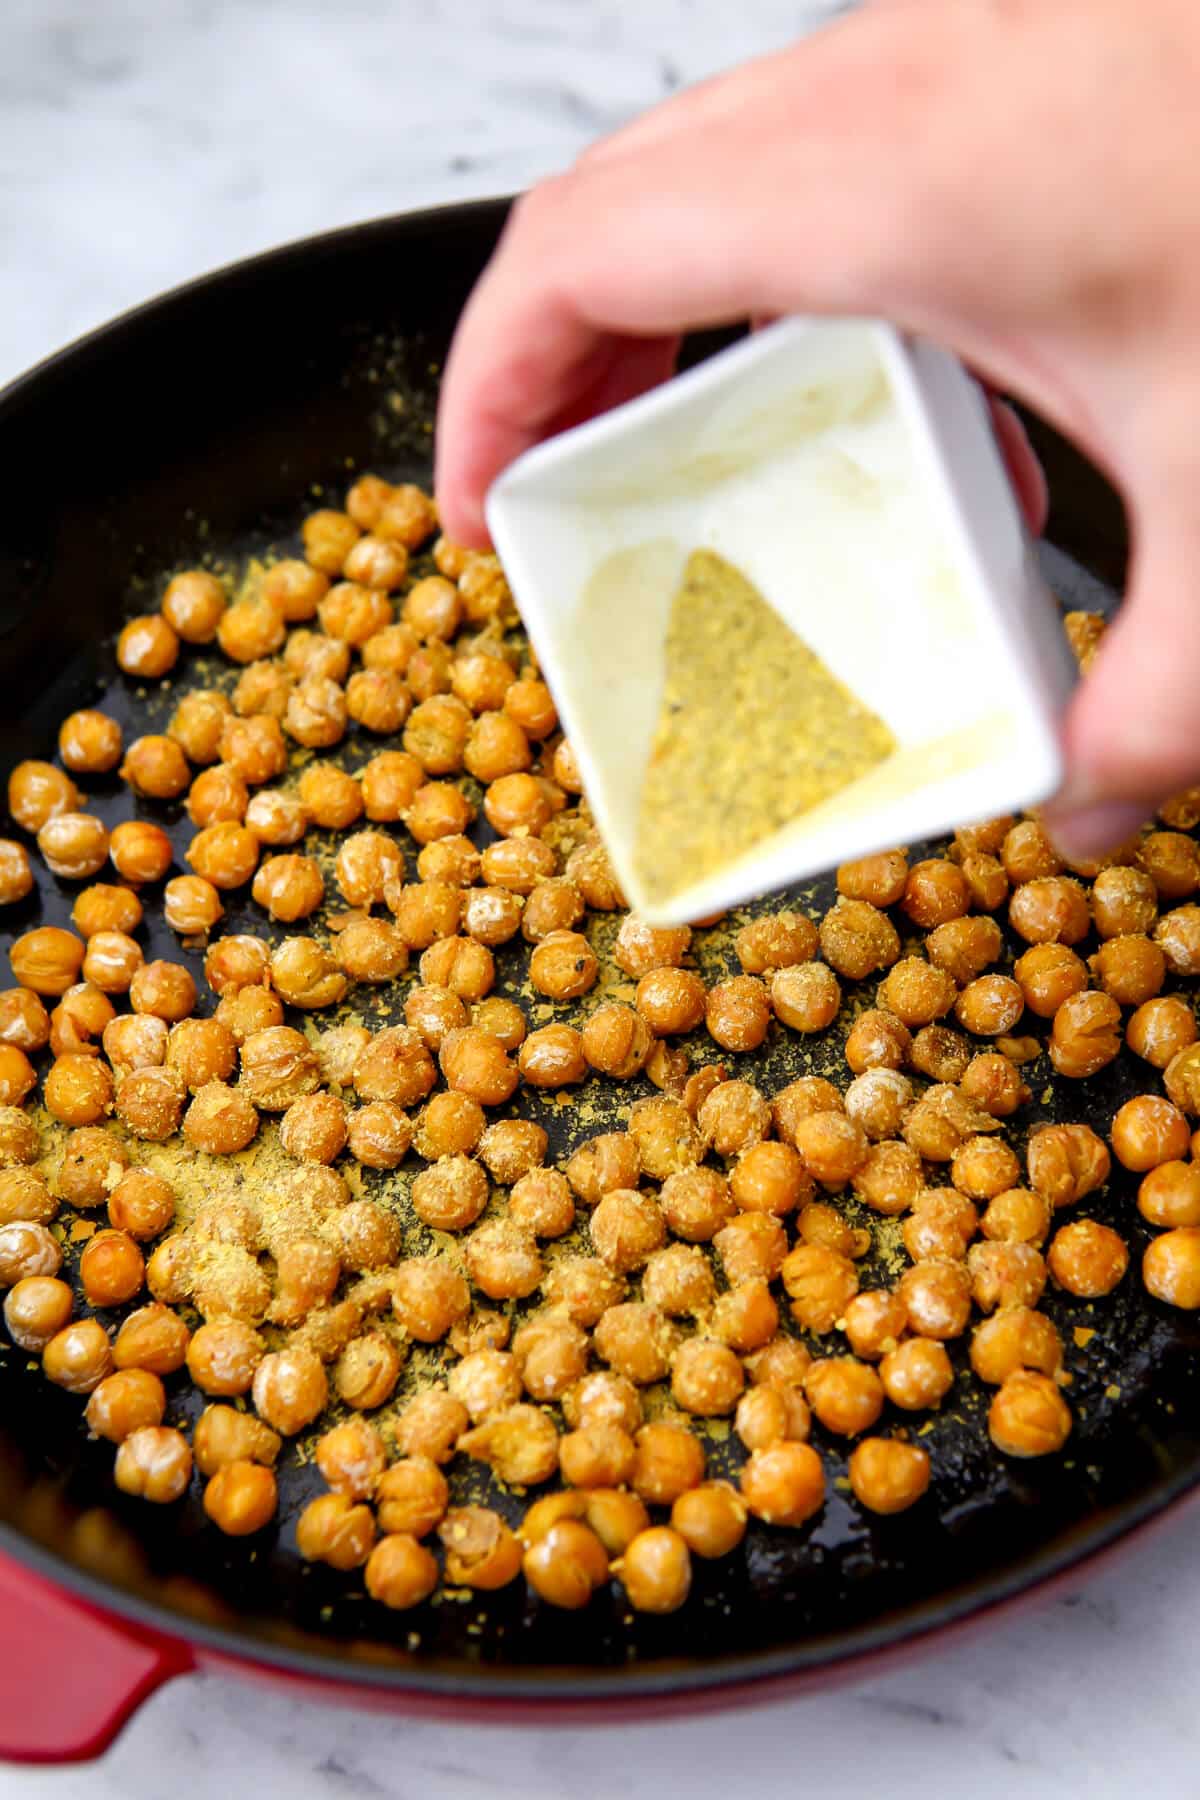 Sprinkling the sauteed chickpeas with seasoning after cooking.